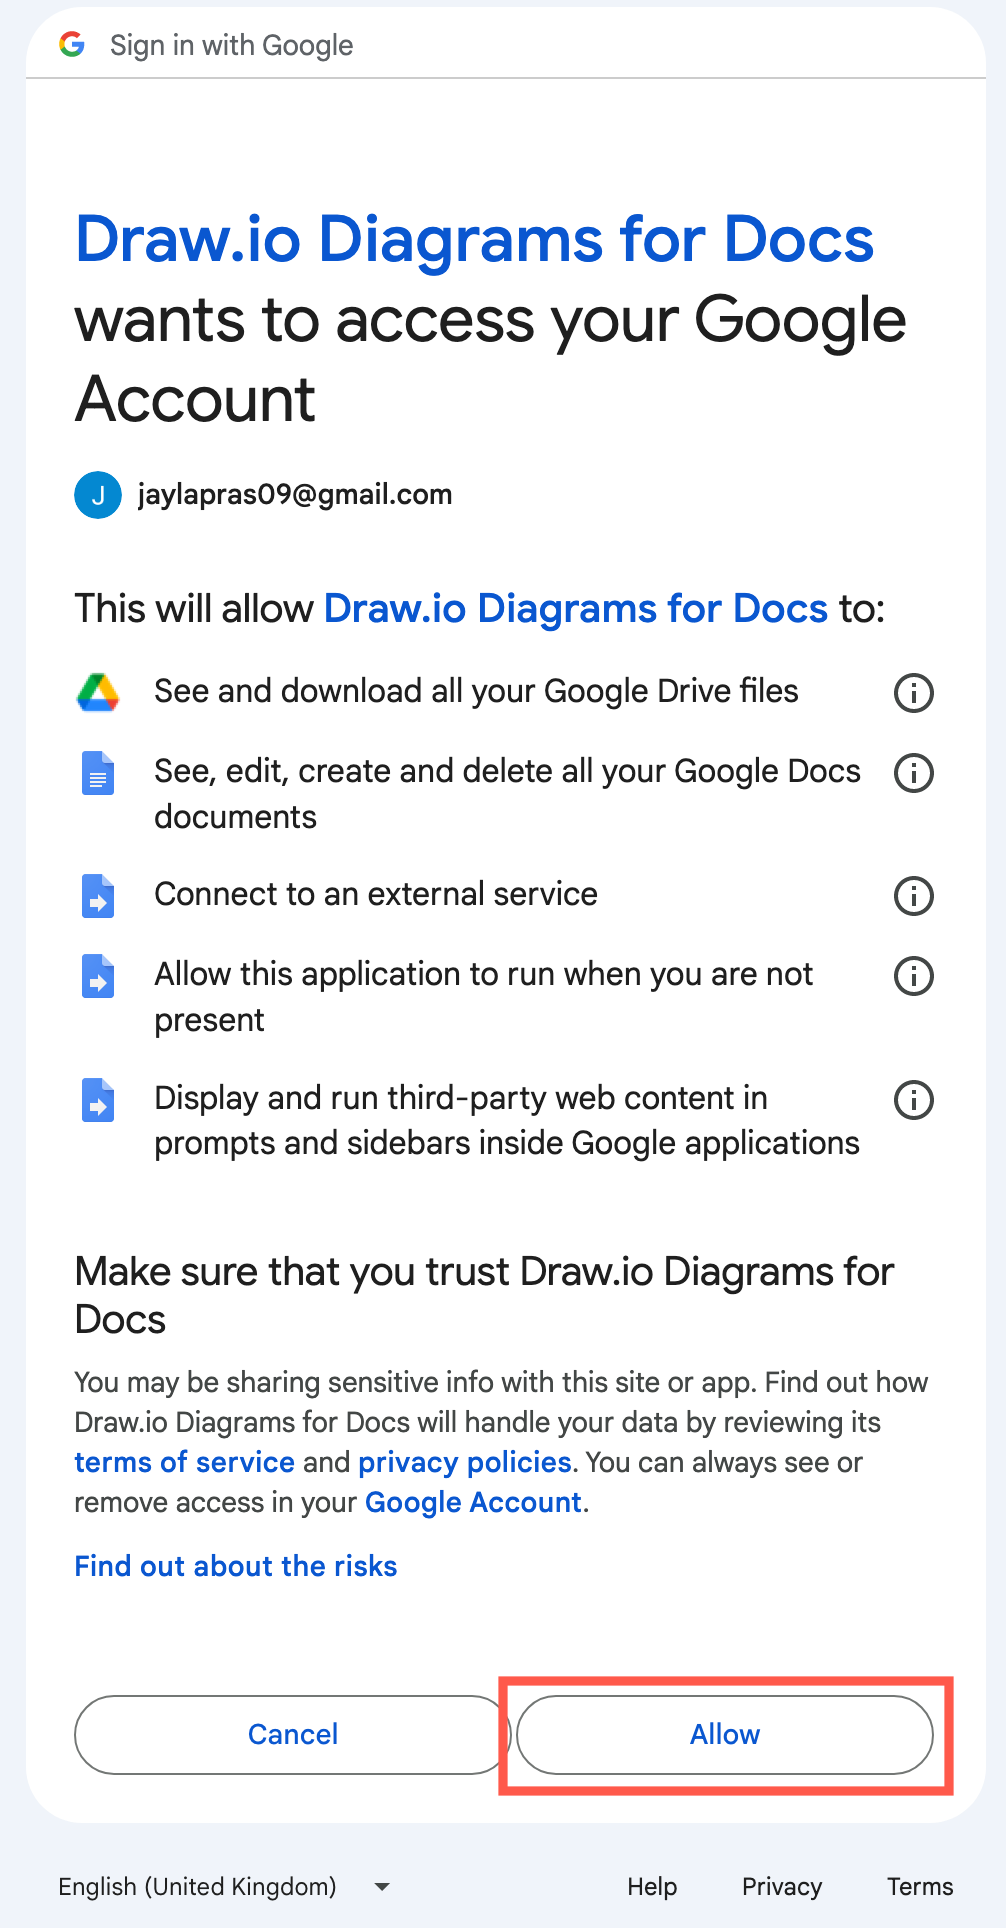 Grant permission for draw.io to access your Google Drive files and Google Docs